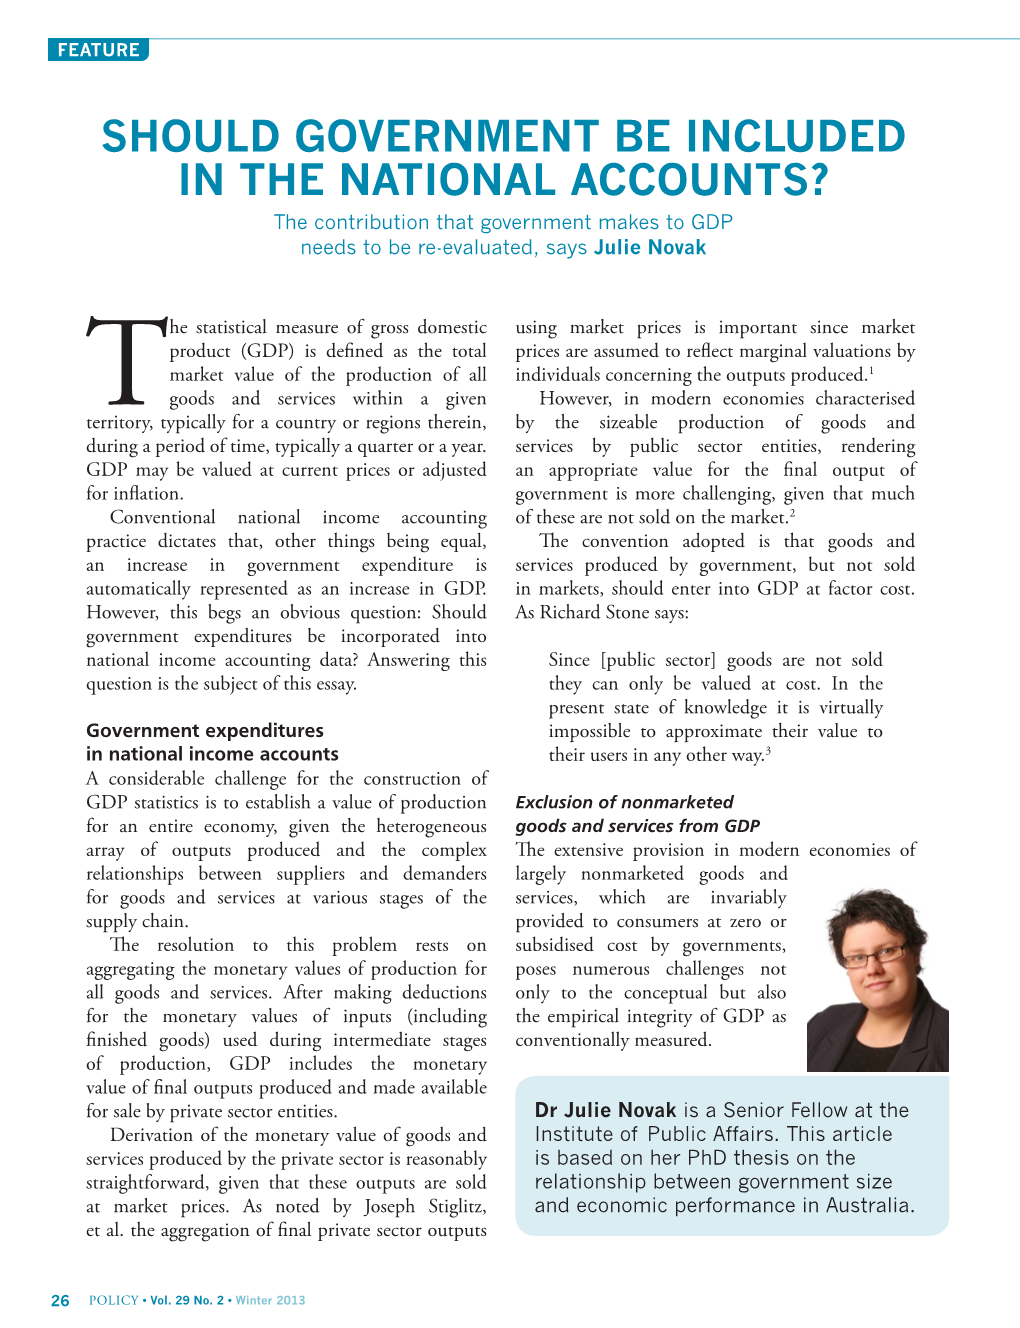 SHOULD GOVERNMENT BE INCLUDED in the NATIONAL ACCOUNTS? the Contribution That Government Makes to GDP Needs to Be Re-Evaluated, Says Julie Novak